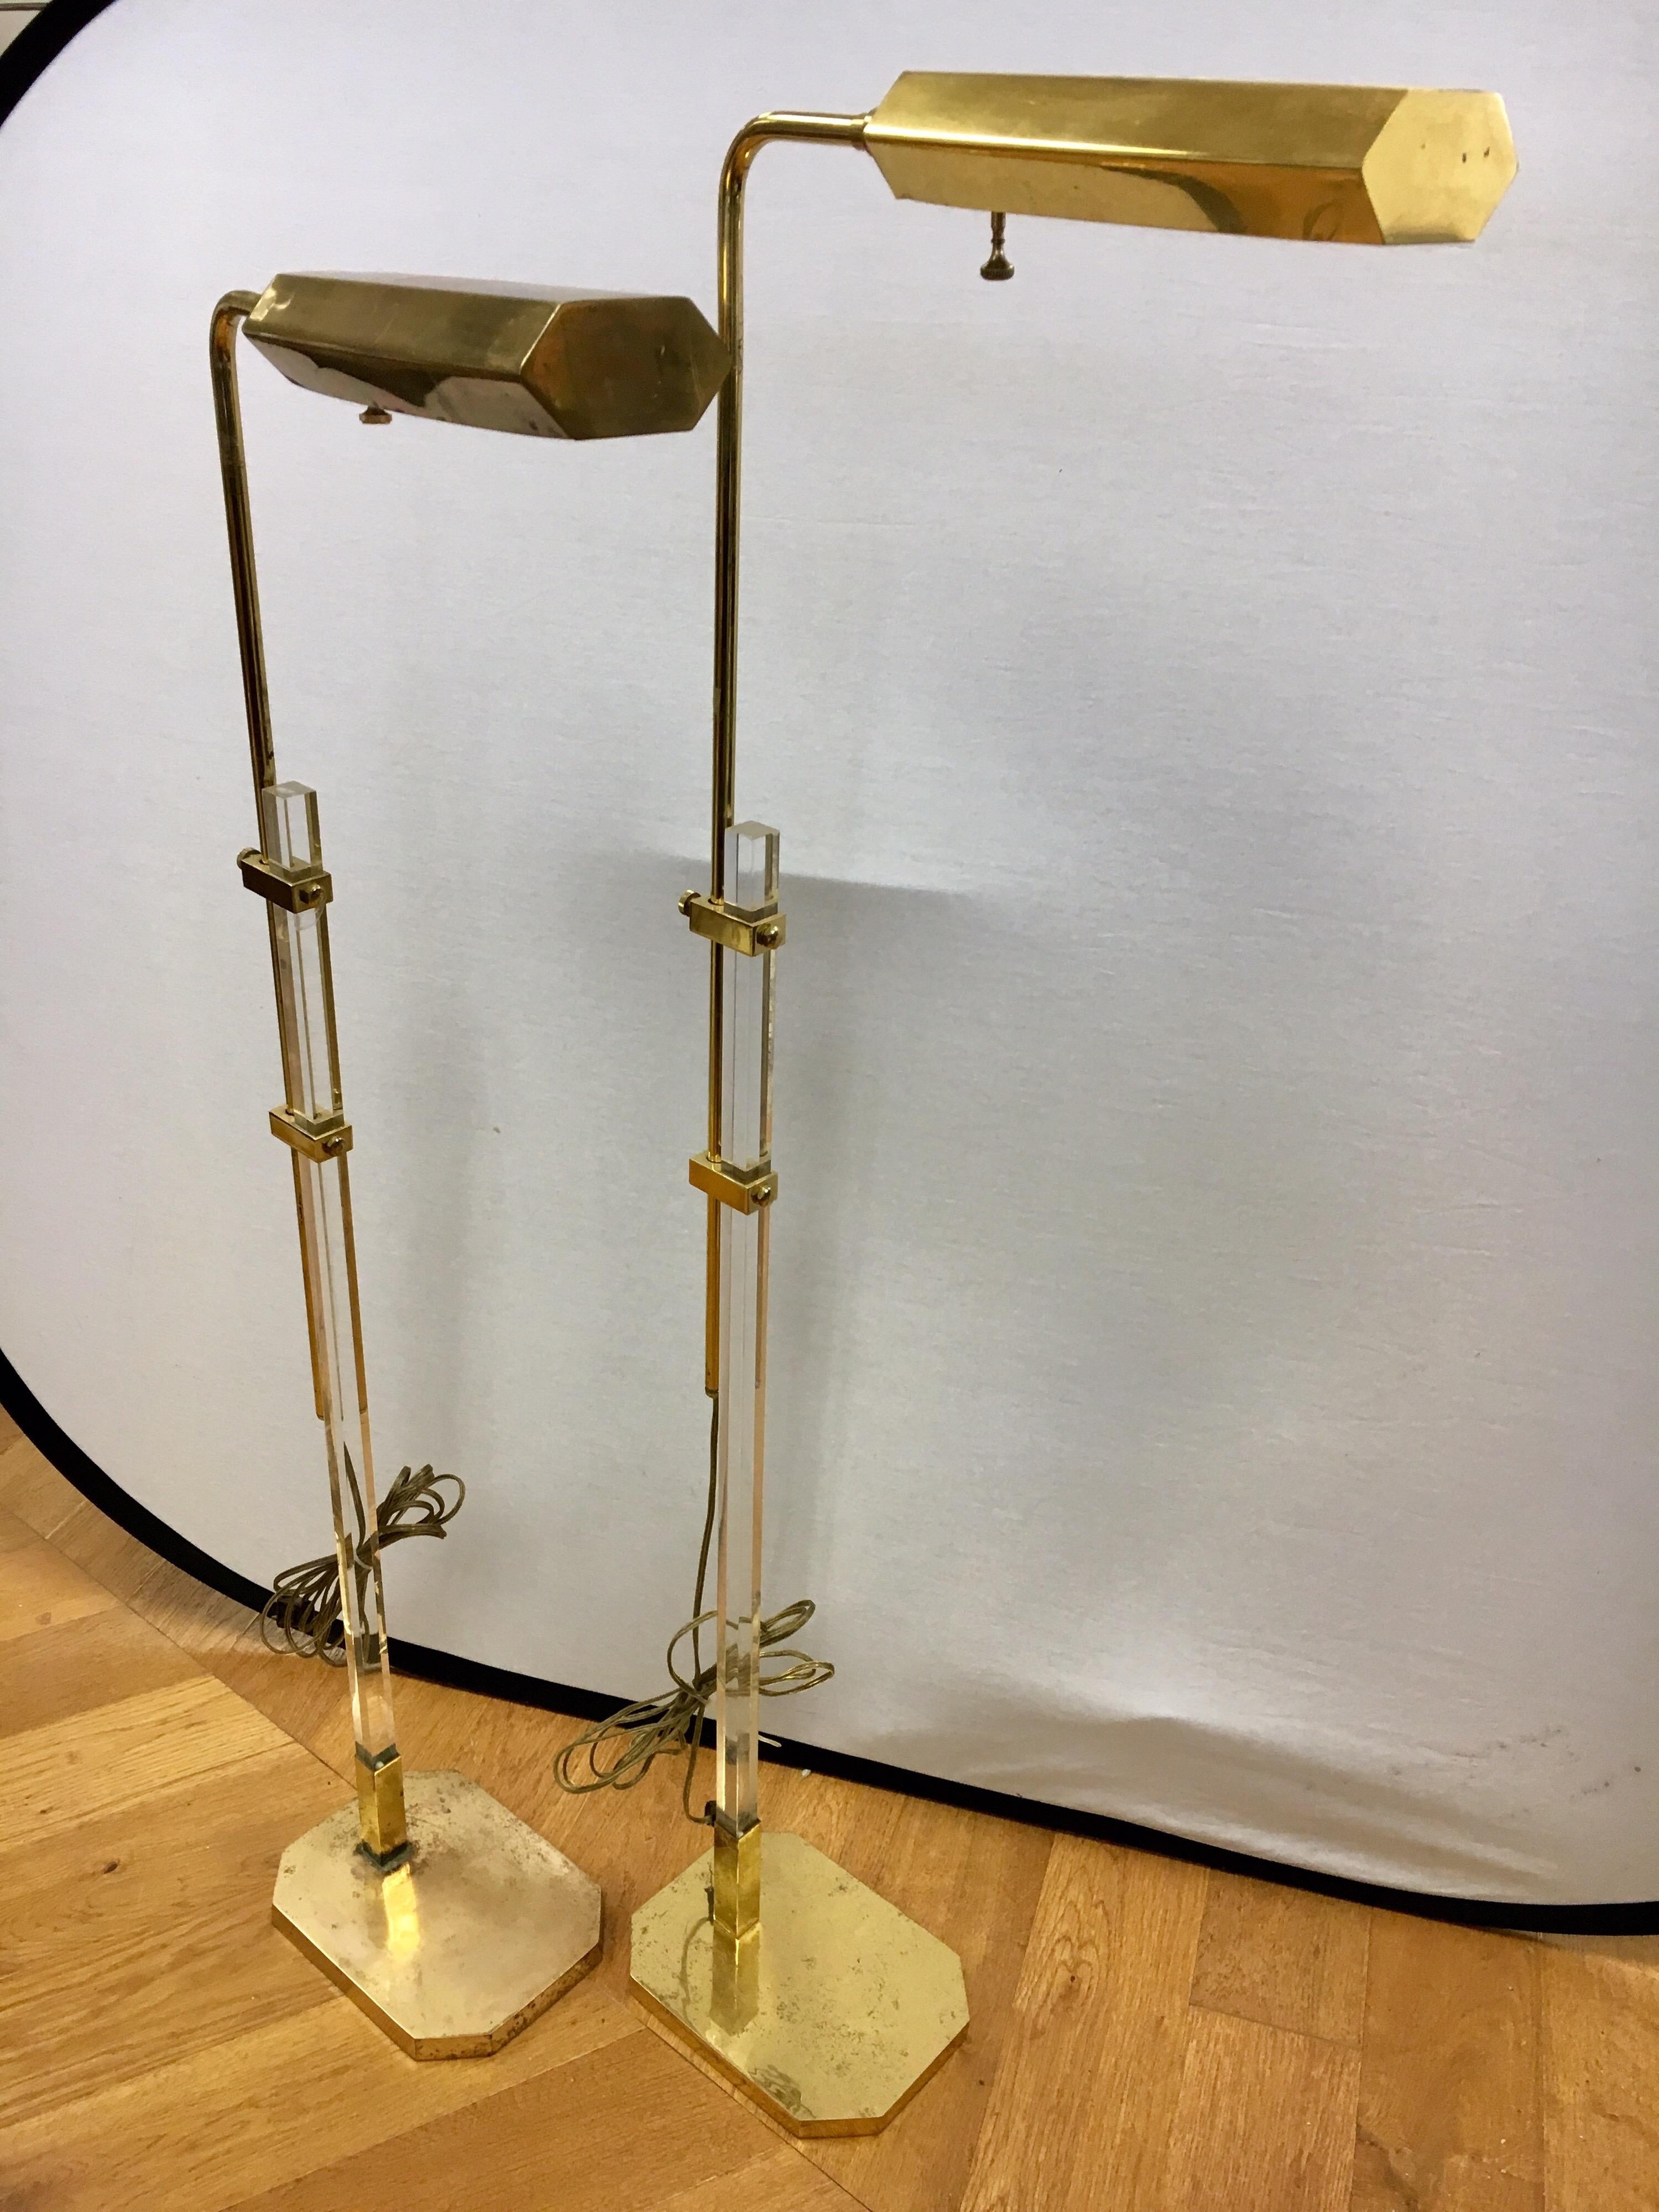 Pair of matching brass and Lucite floor lamps. They swivel and adjust at height.
They are true period pieces from the 1970s and do have tarnish on brass base,
one more than the other.